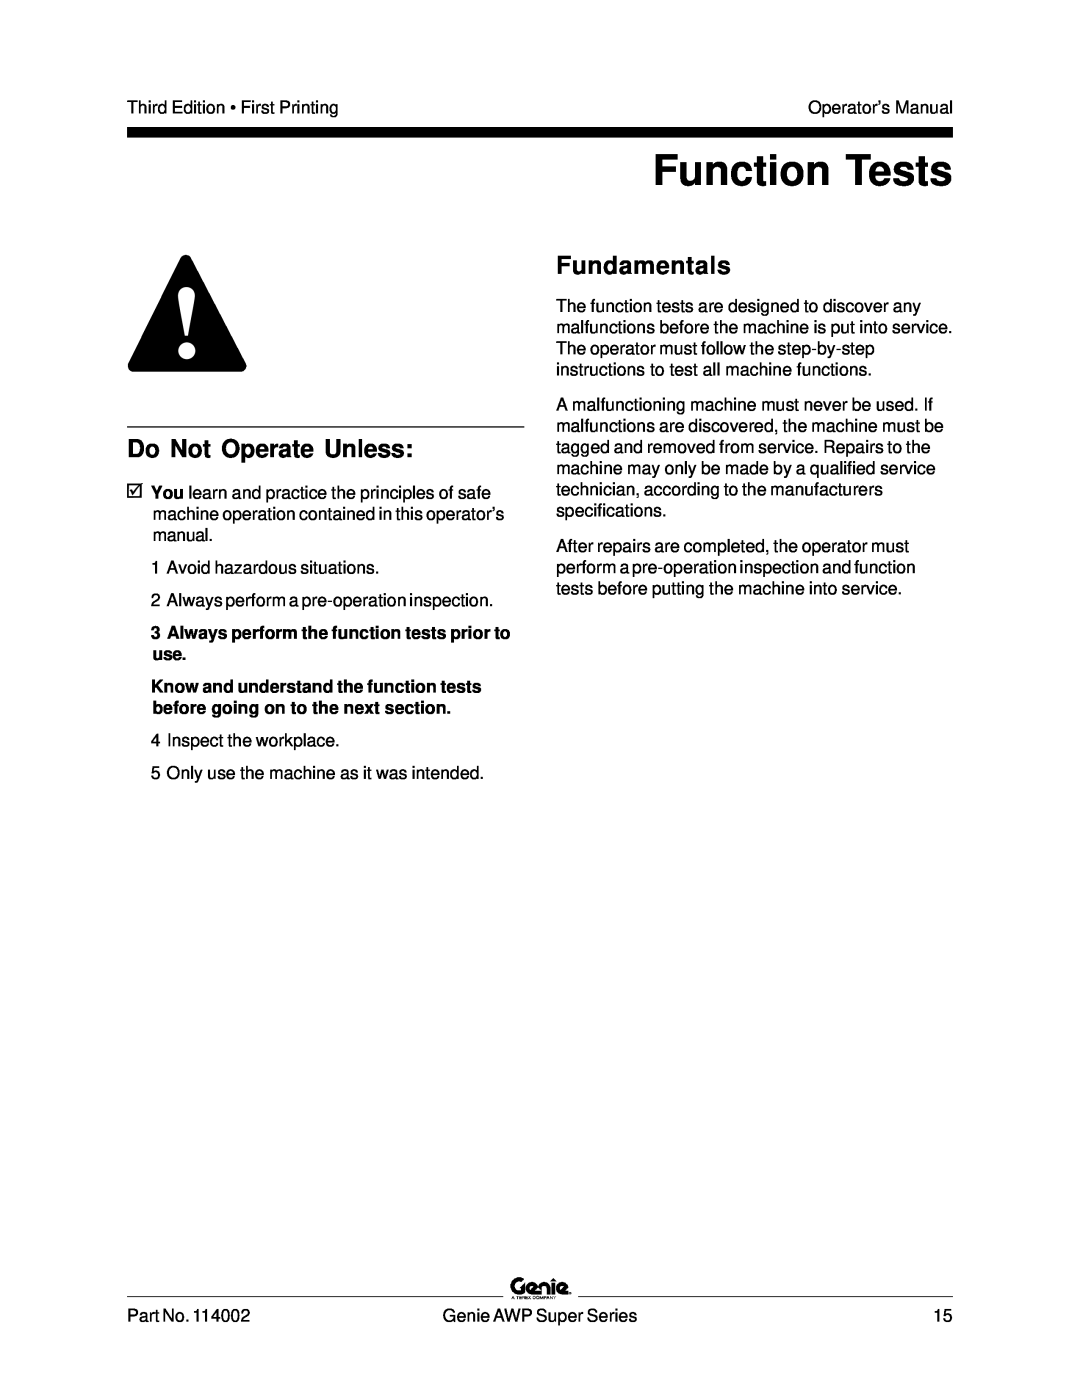 Genie 114002 manual Function Tests, Always perform the function tests prior to use, Do Not Operate Unless, Fundamentals 